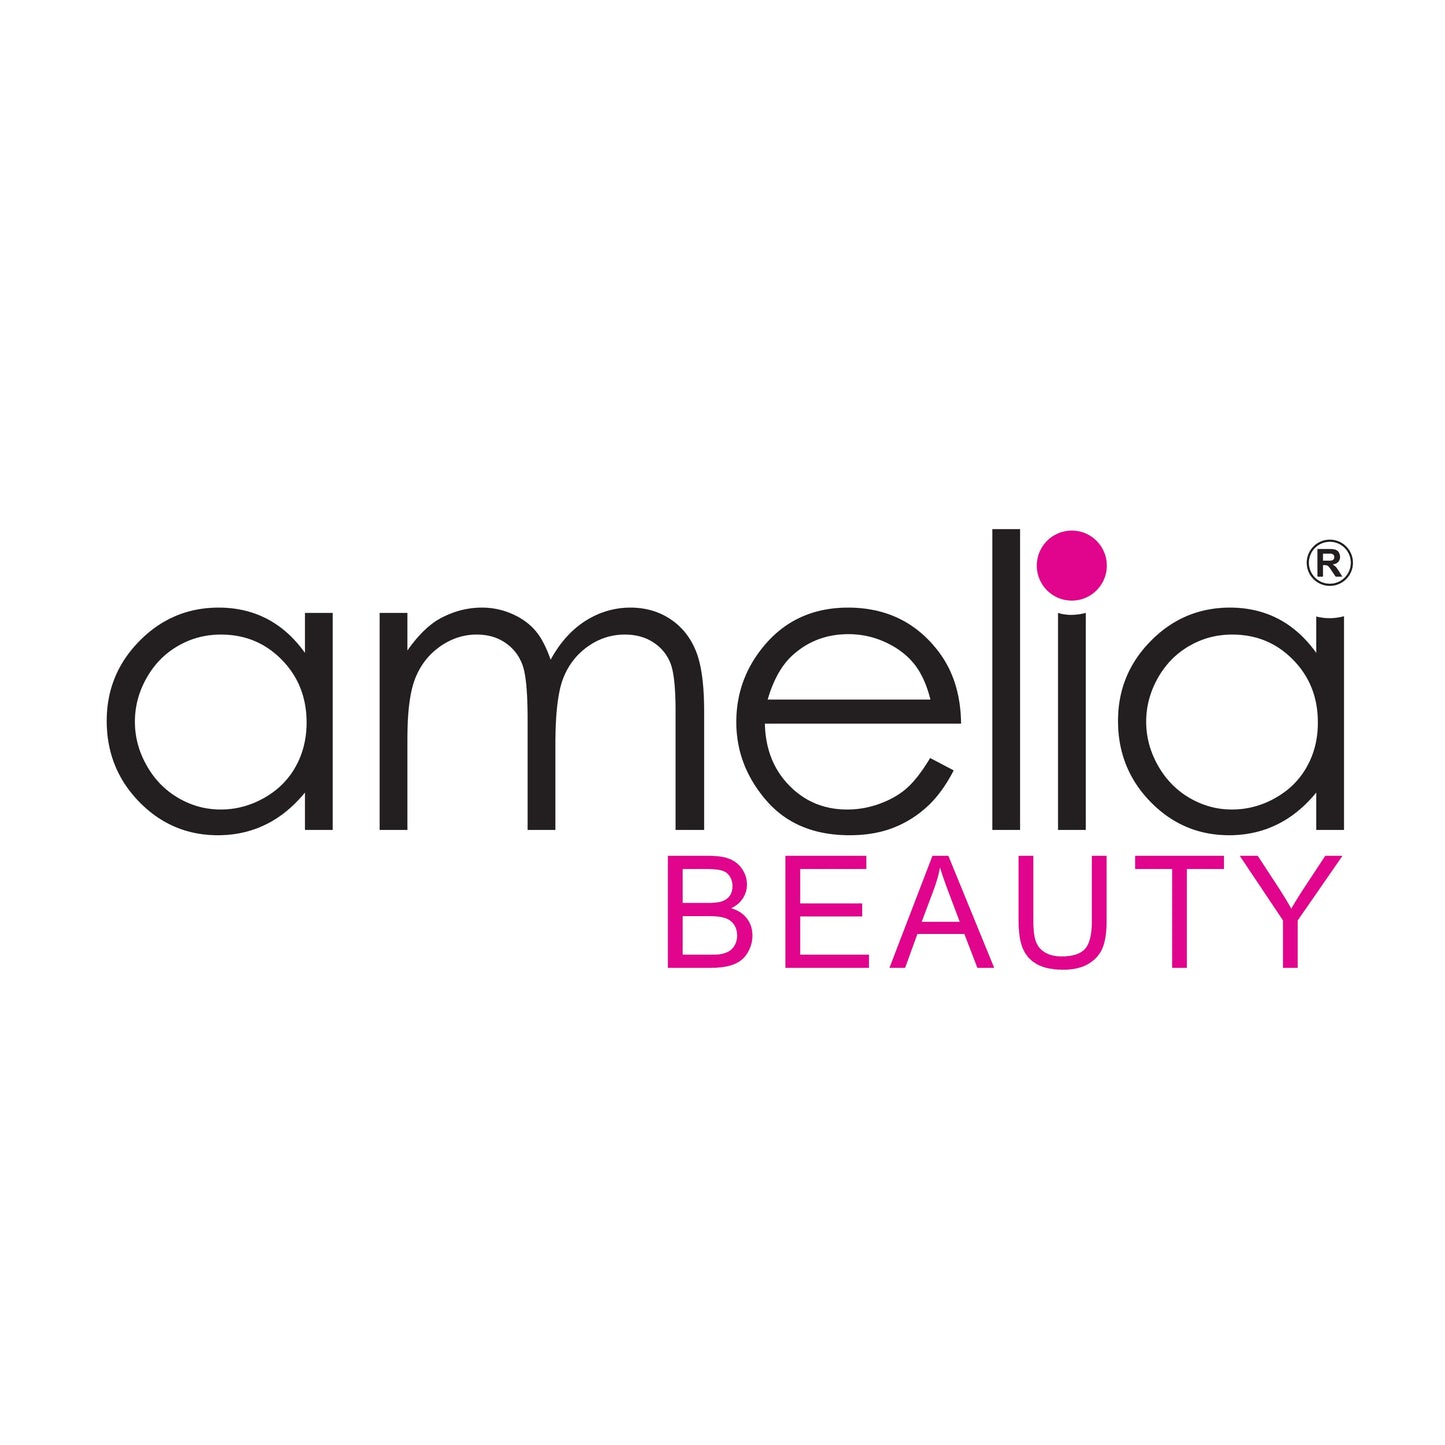 Amelia Beauty Products 8 Medium Smooth Elastic Hair Coils, 2.25in Diameter Spiral Hair Ties, Gentle on Hair, Strong Hold and Minimizes Dents and Creases, Silver